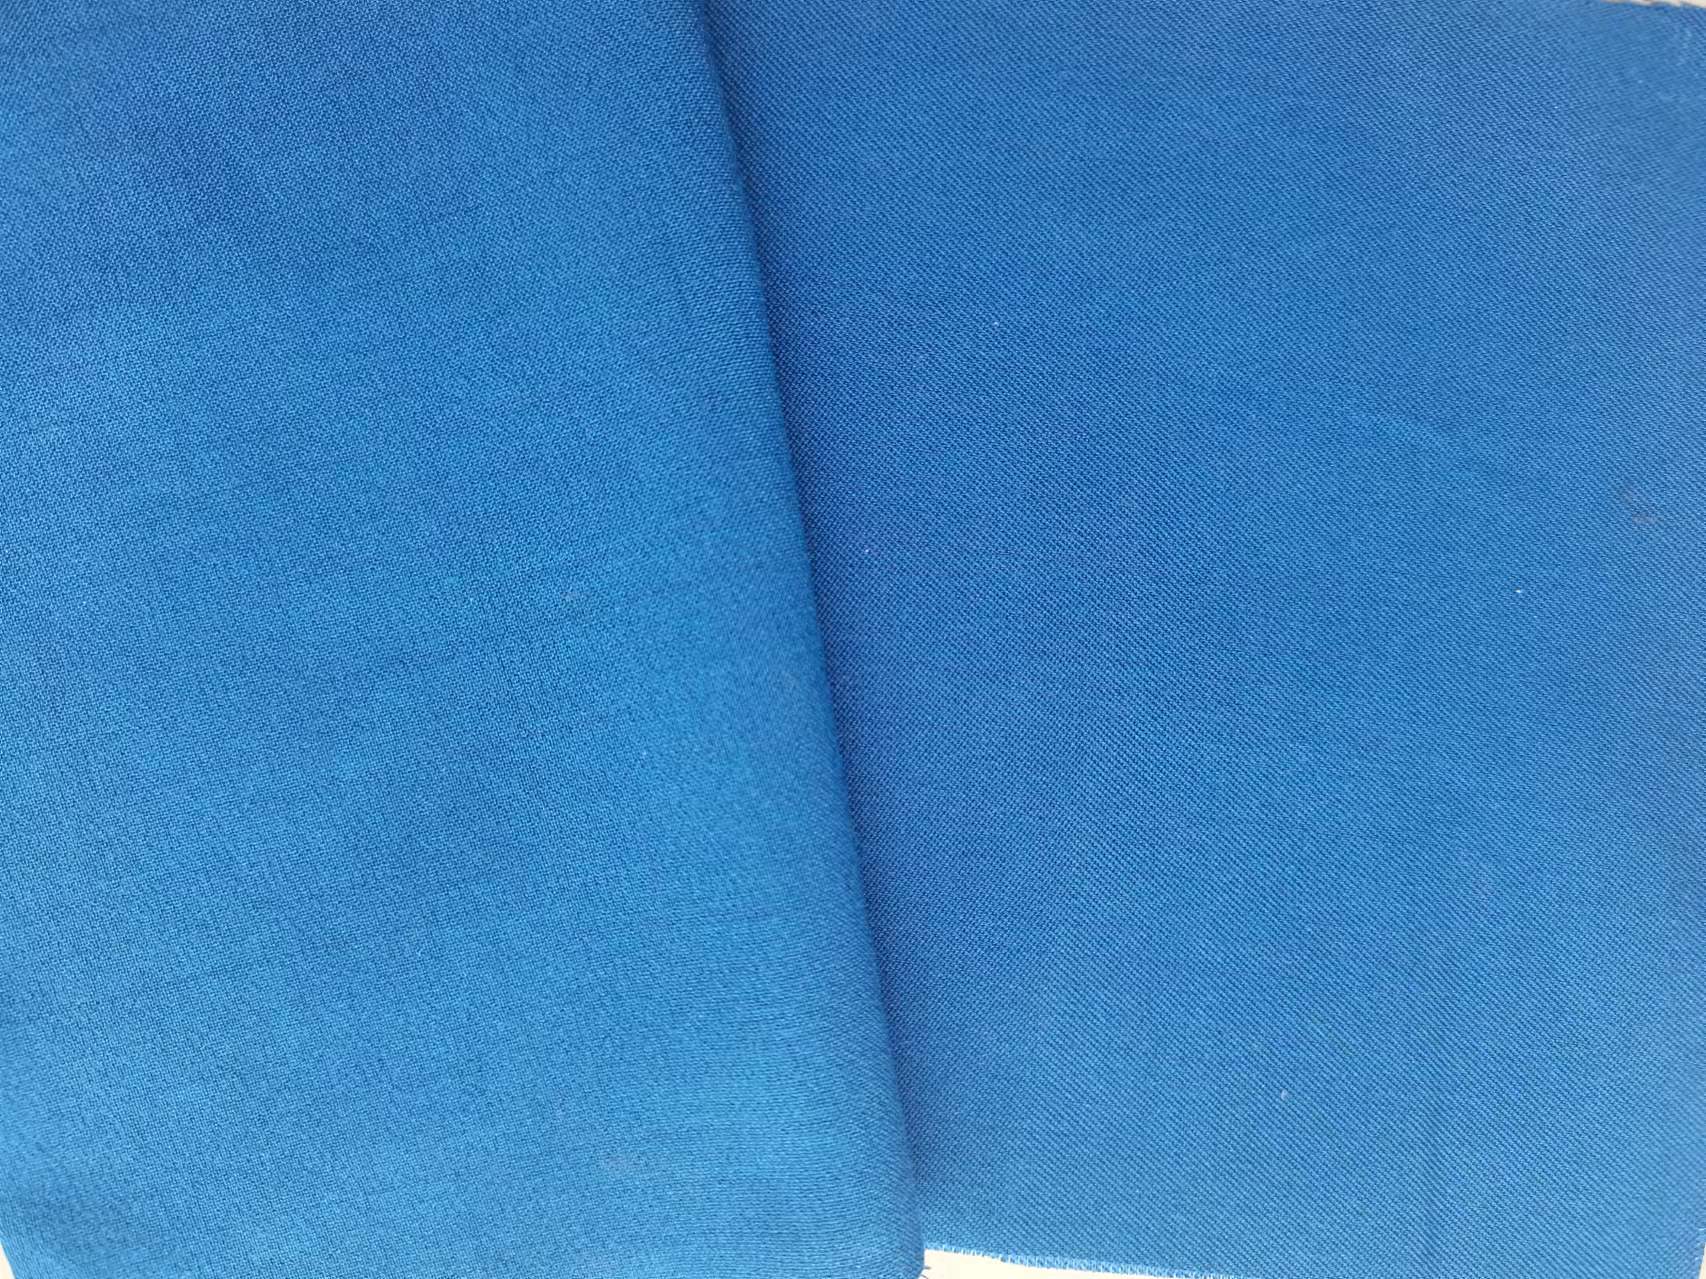 Oil and gas flame retardant antistatic fabric